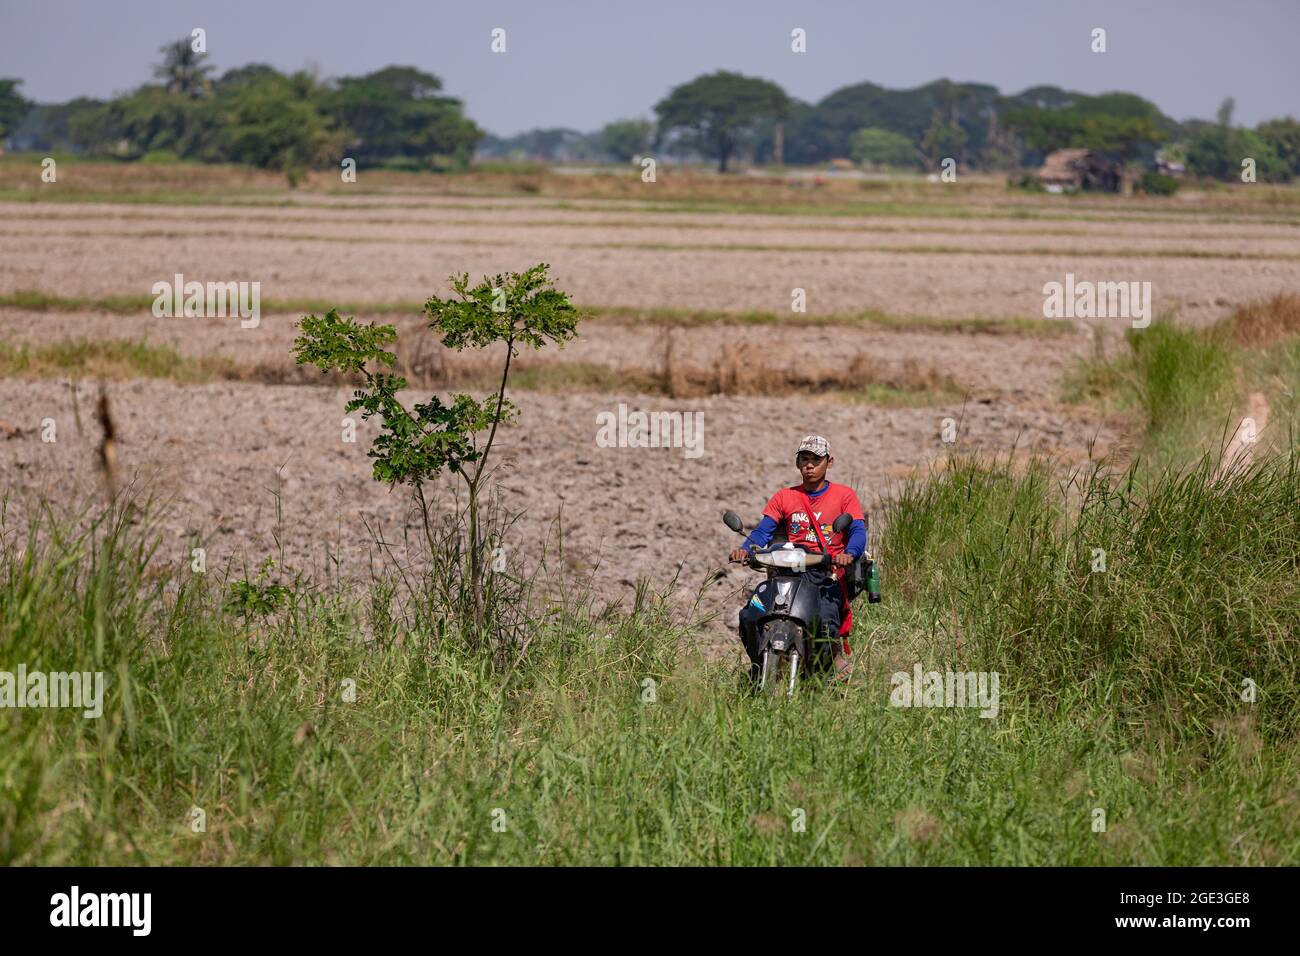 A man on a motorcycle is traveling across the fields of Myanmar on a dirt road Stock Photo